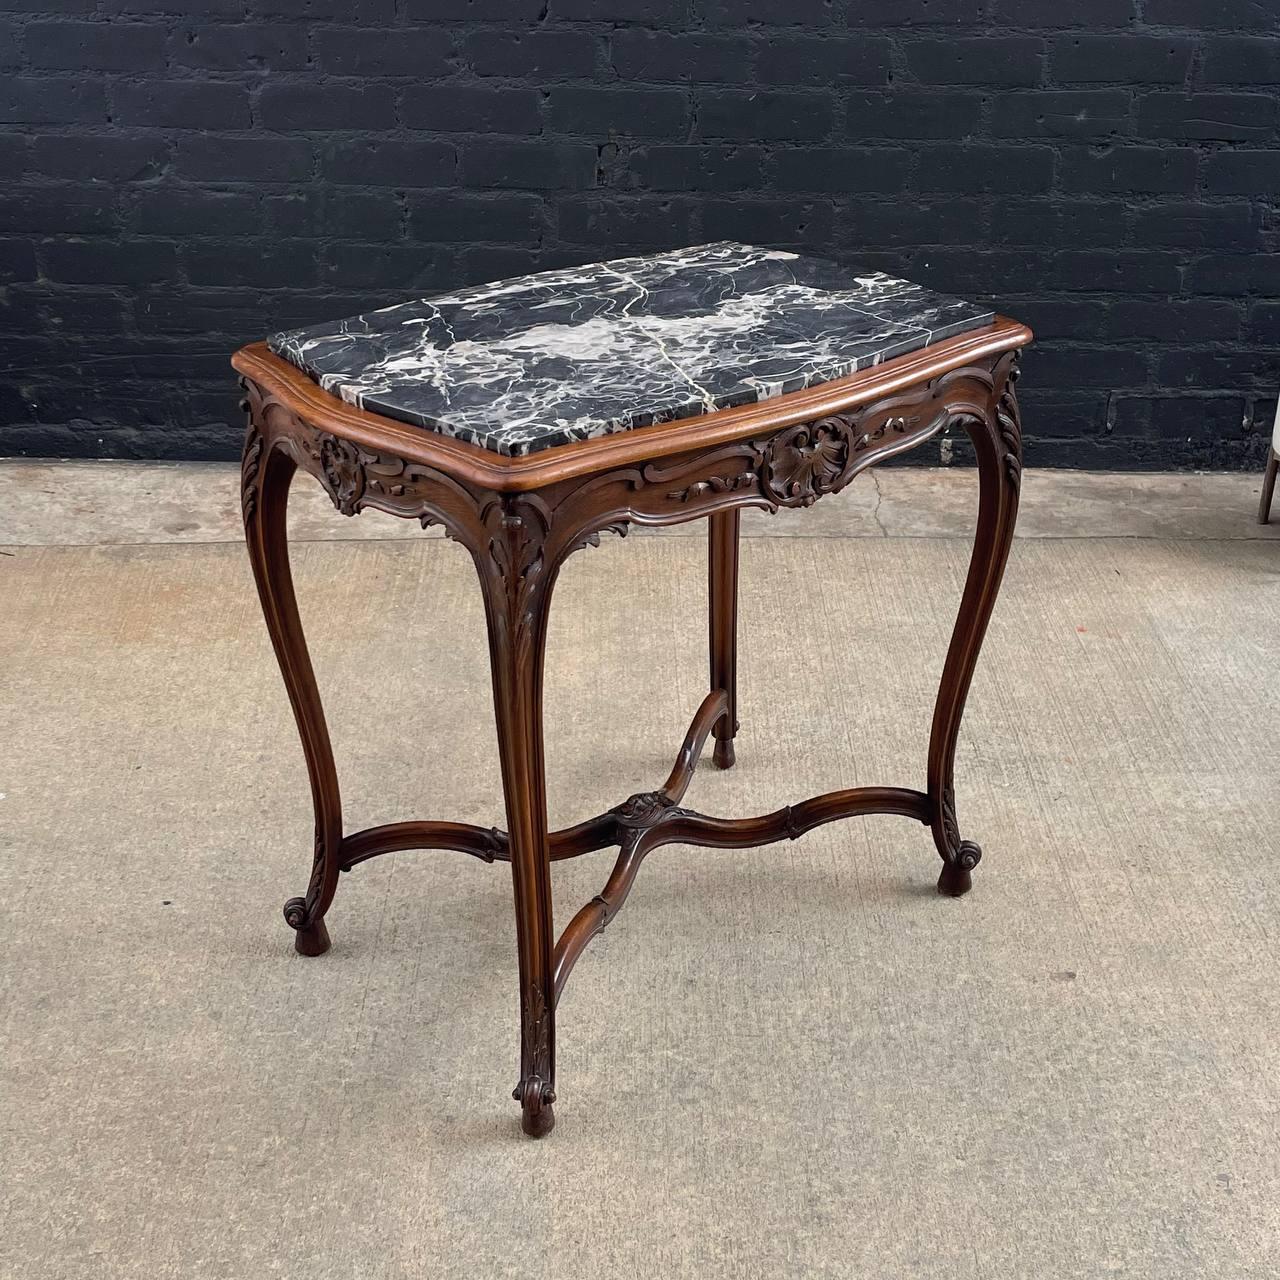 French 1930s Louis XV Style Table with Carved Rocaille Decorations 

Country: French
Materials: Carved Wood, Marble Top
Condition: Original Condition
Style: French Antique
Year: 1930’s

$2,200

Dimensions 
31”H x 32.50”W x 22.75”D